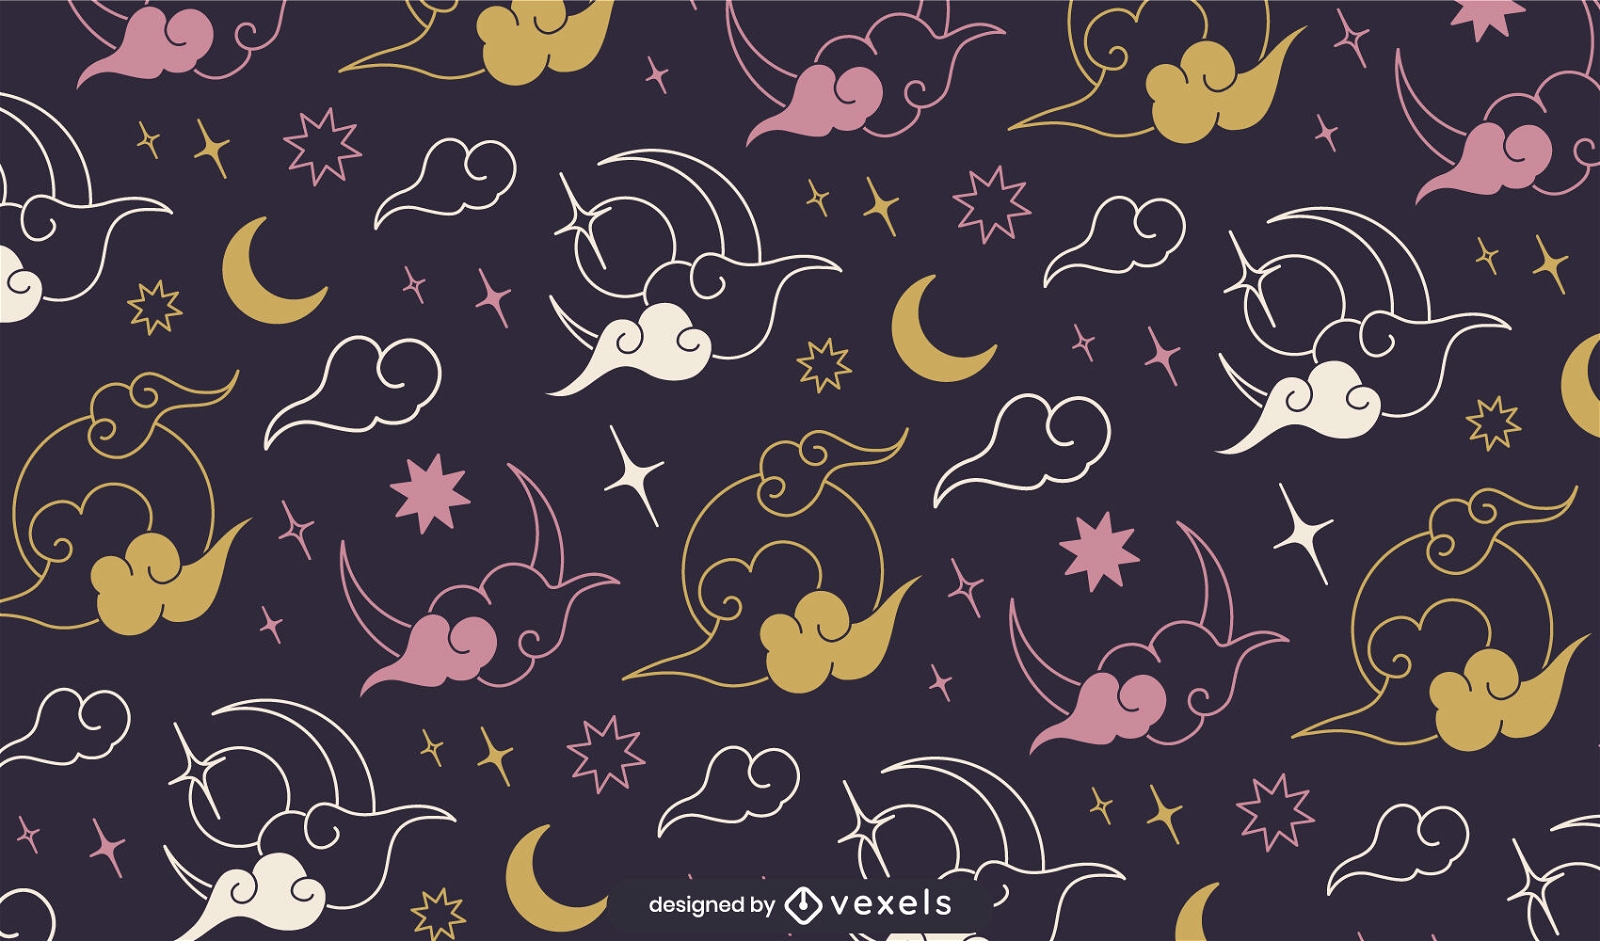 Mystic moon and clouds pattern design